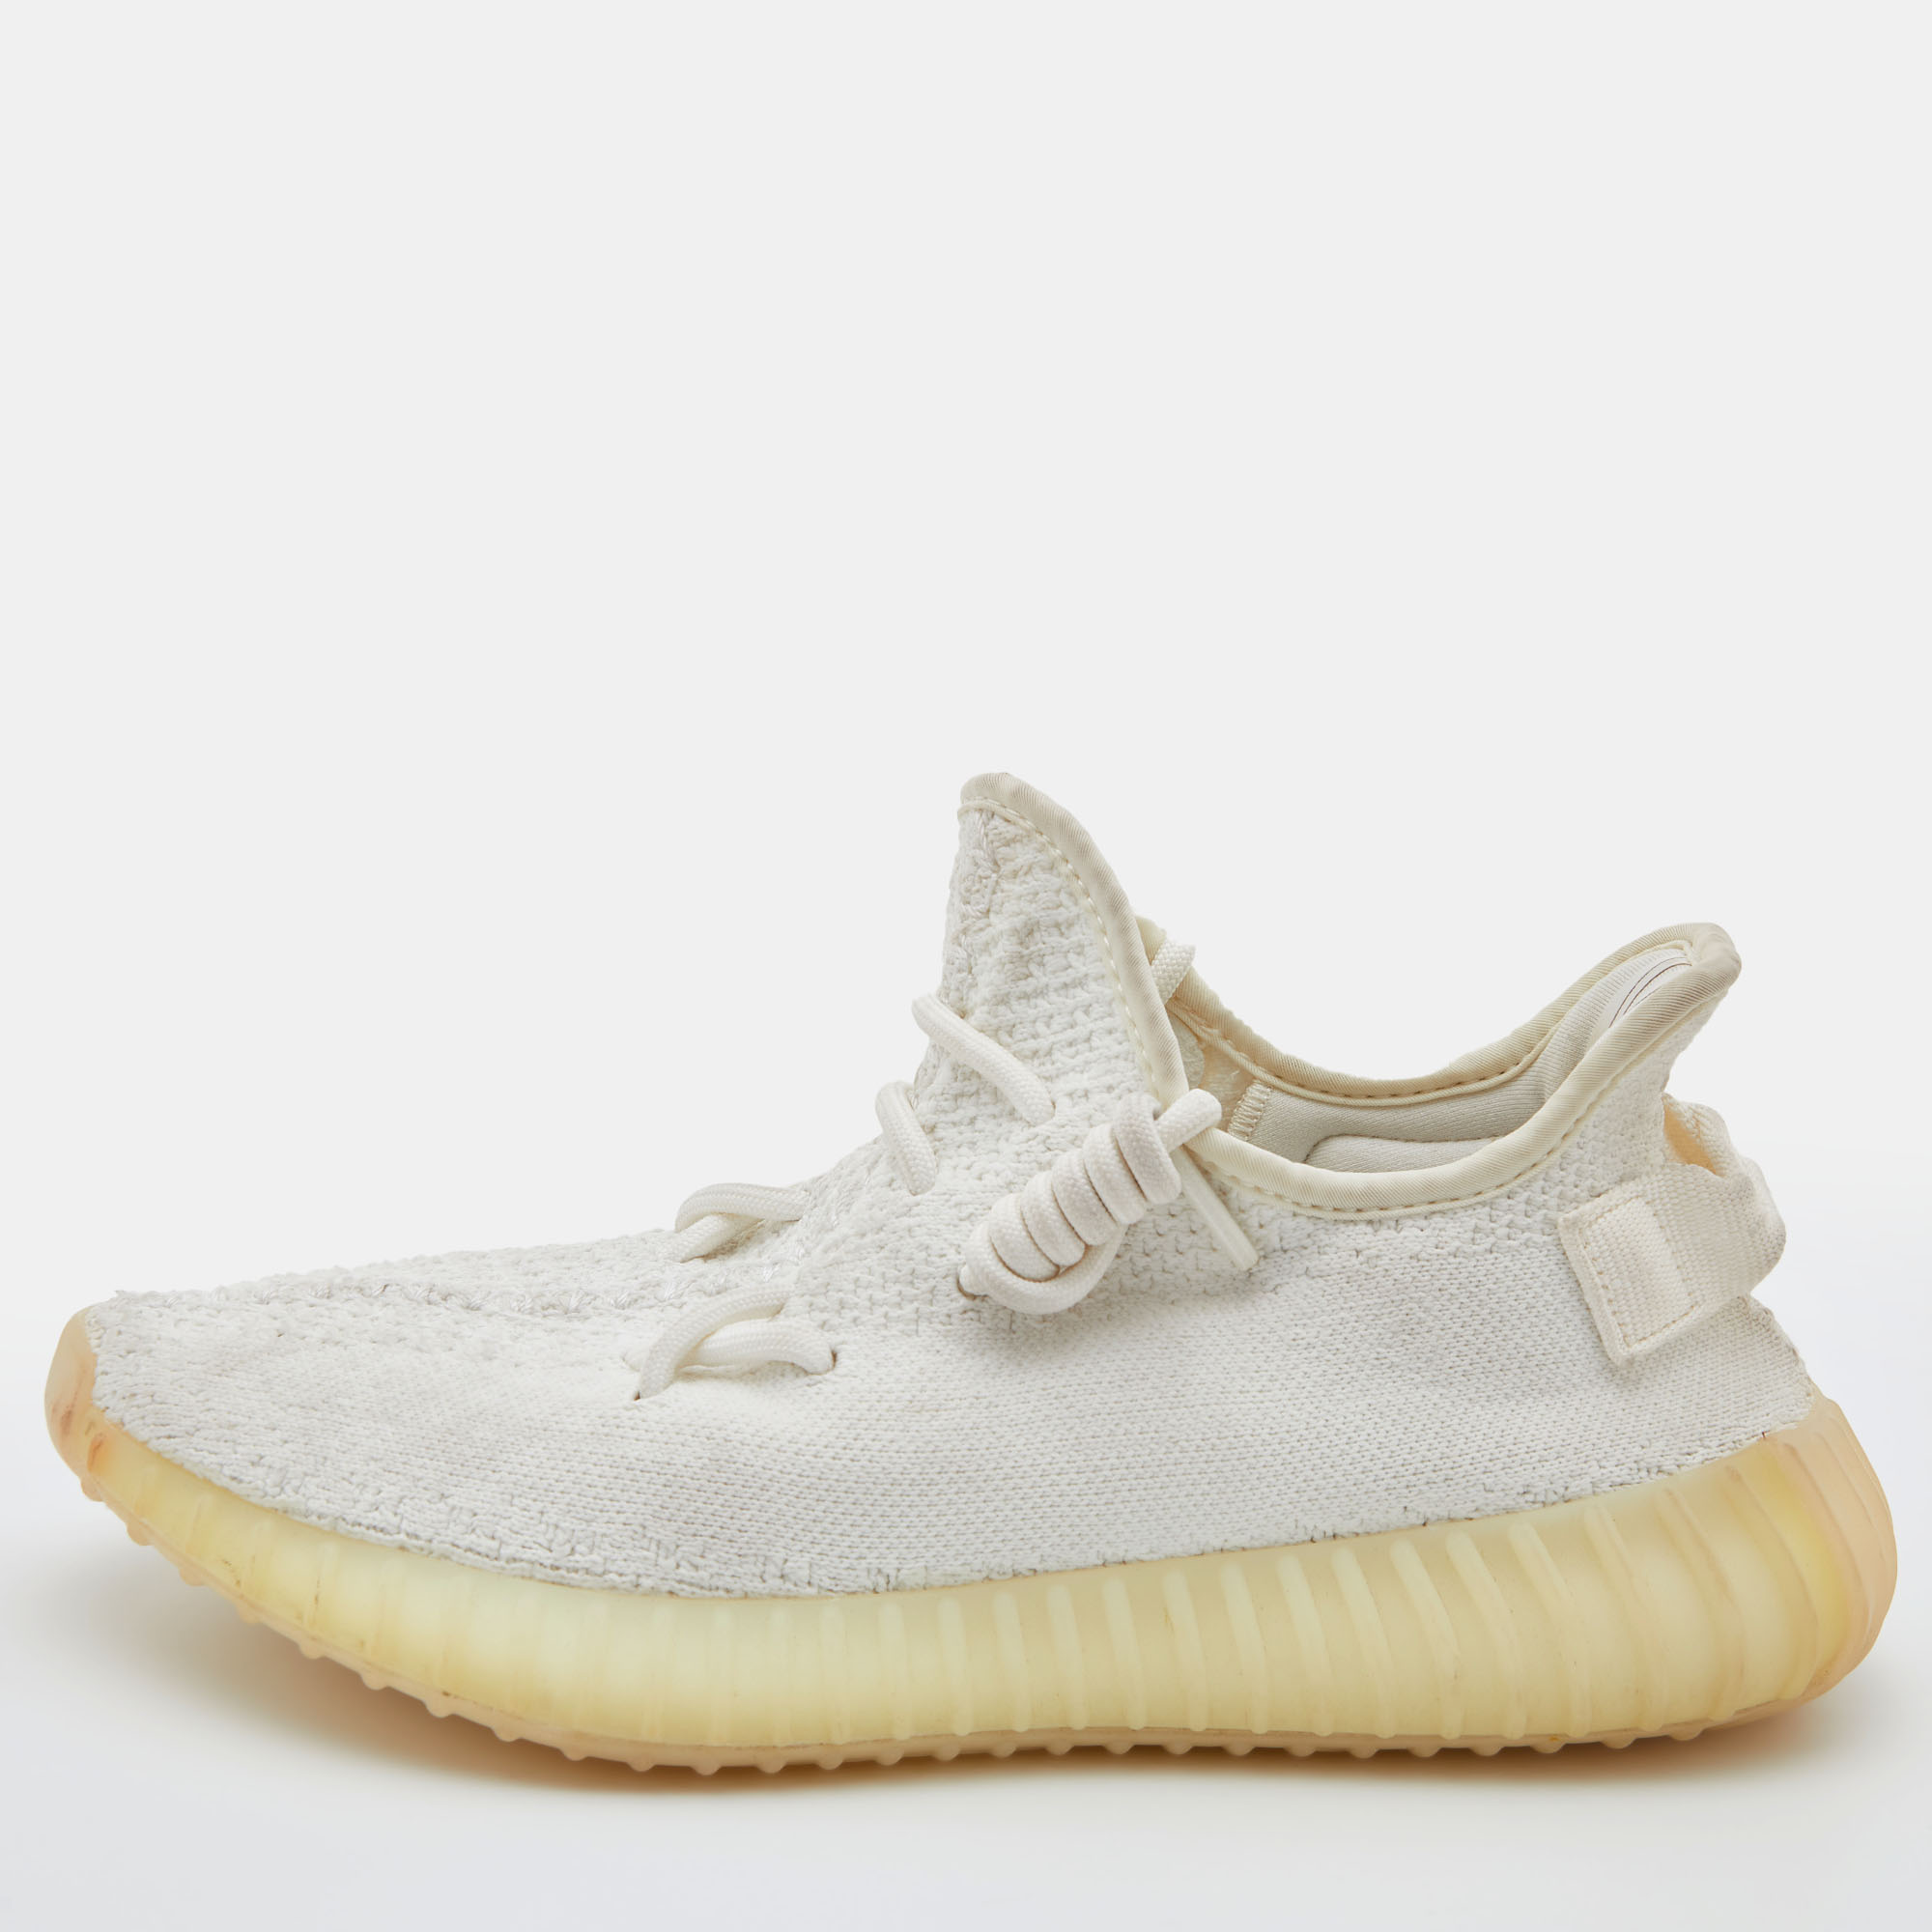 Yeezy x Adidas Cream Knit Fabric Boost 350 V2 Cream Sneakers Size 38 2/3